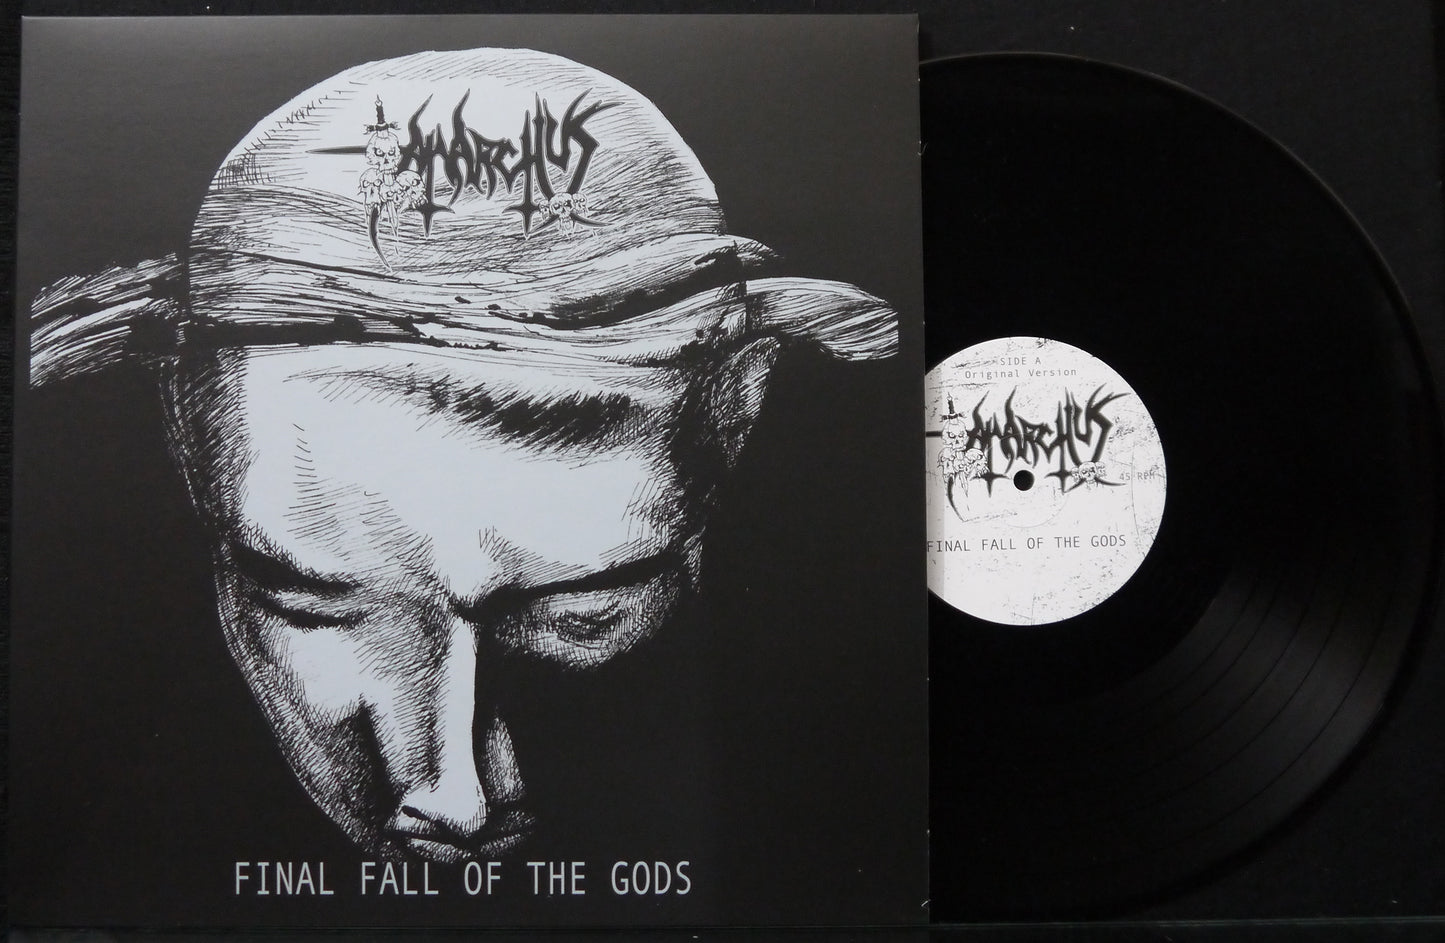 ANARCHUS - Final Fall Of The Gods 12"